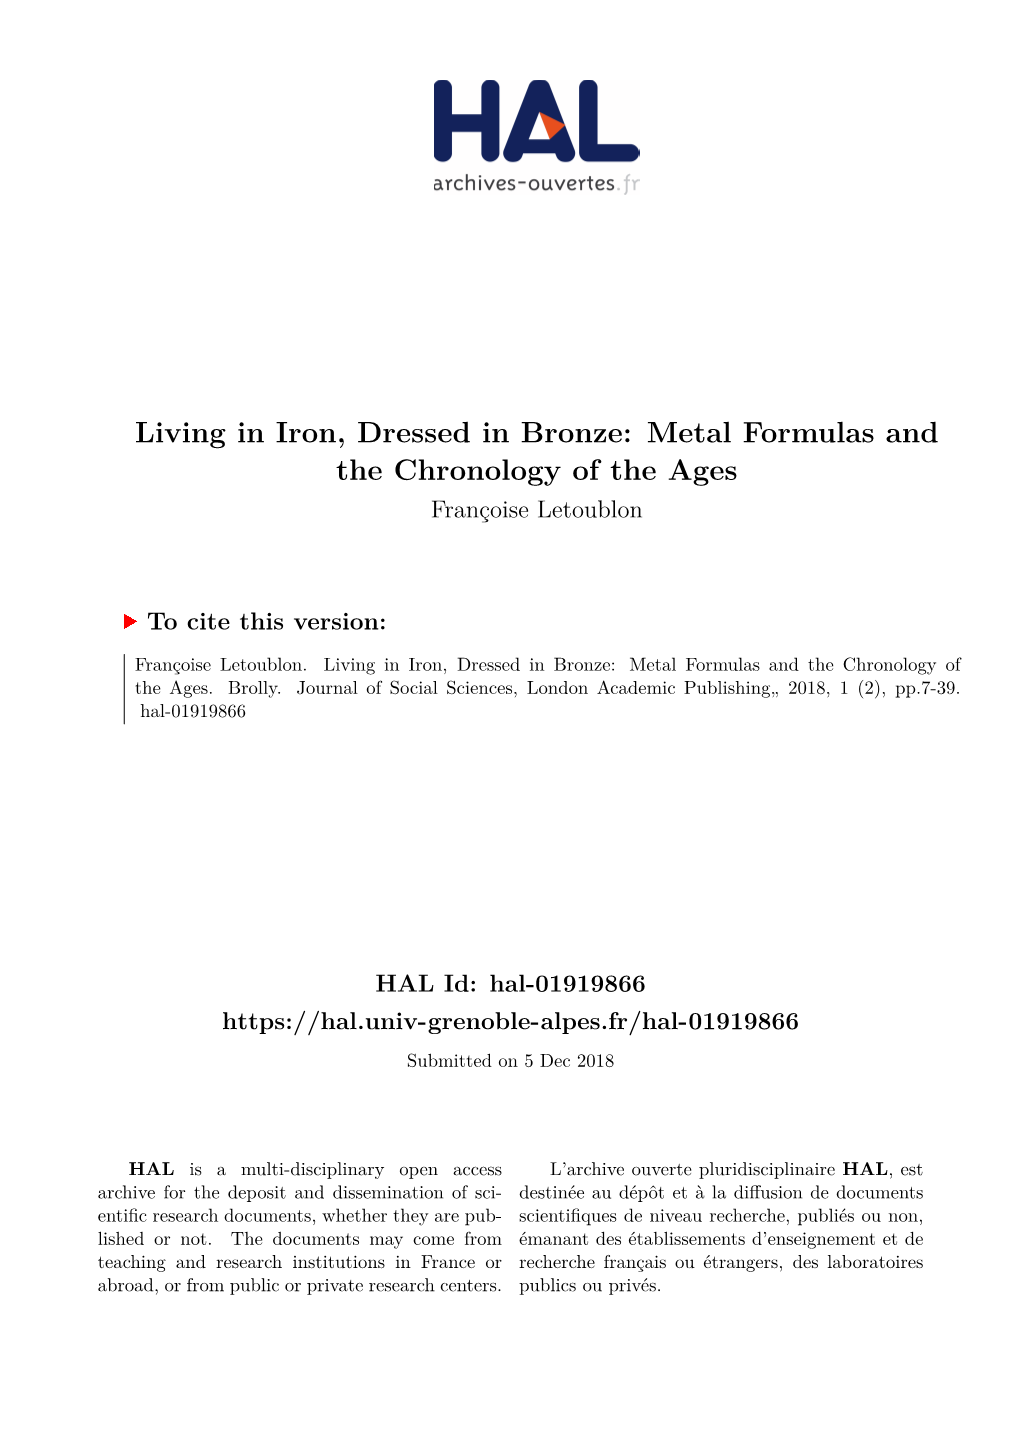 Living in Iron, Dressed in Bronze: Metal Formulas and the Chronology of the Ages Françoise Letoublon